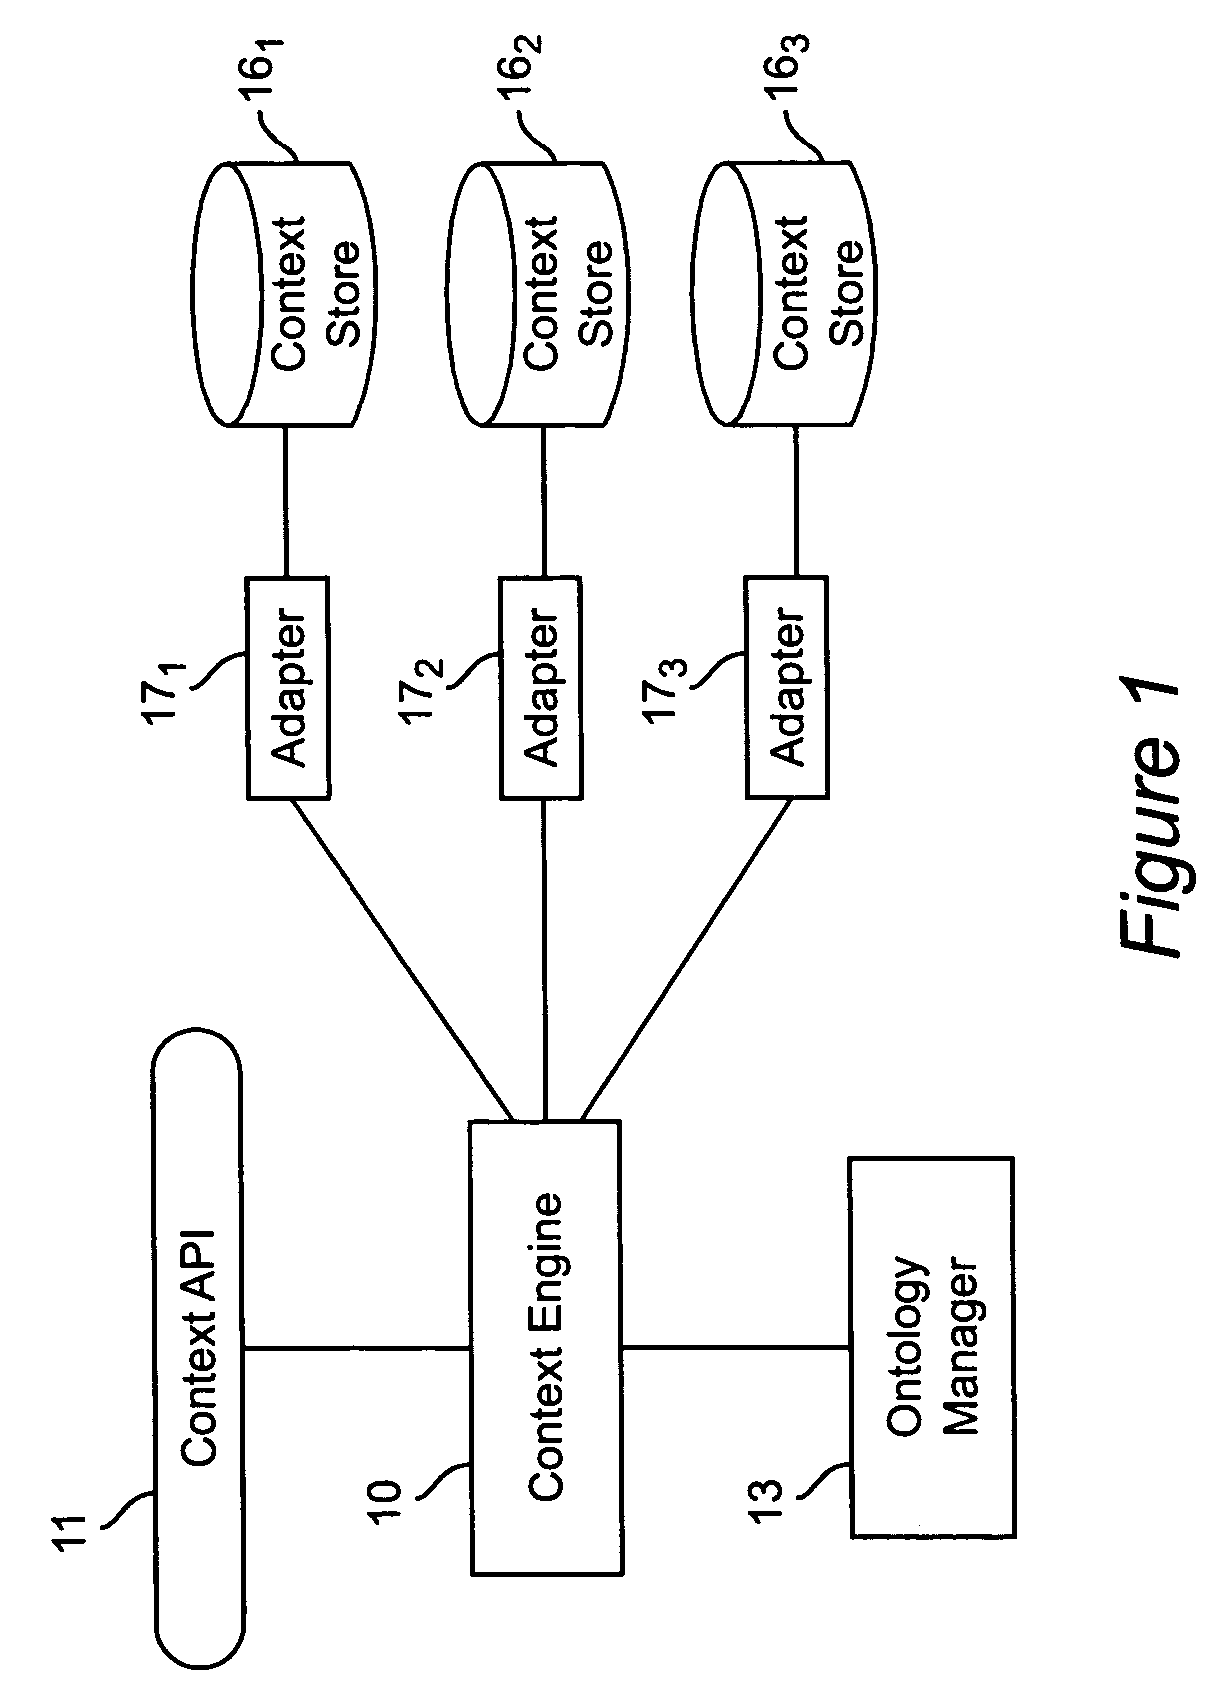 Apparatus and method for managing and inferencing contextural relationships accessed by the context engine to answer queries received from the application program interface, wherein ontology manager is operationally coupled with a working memory